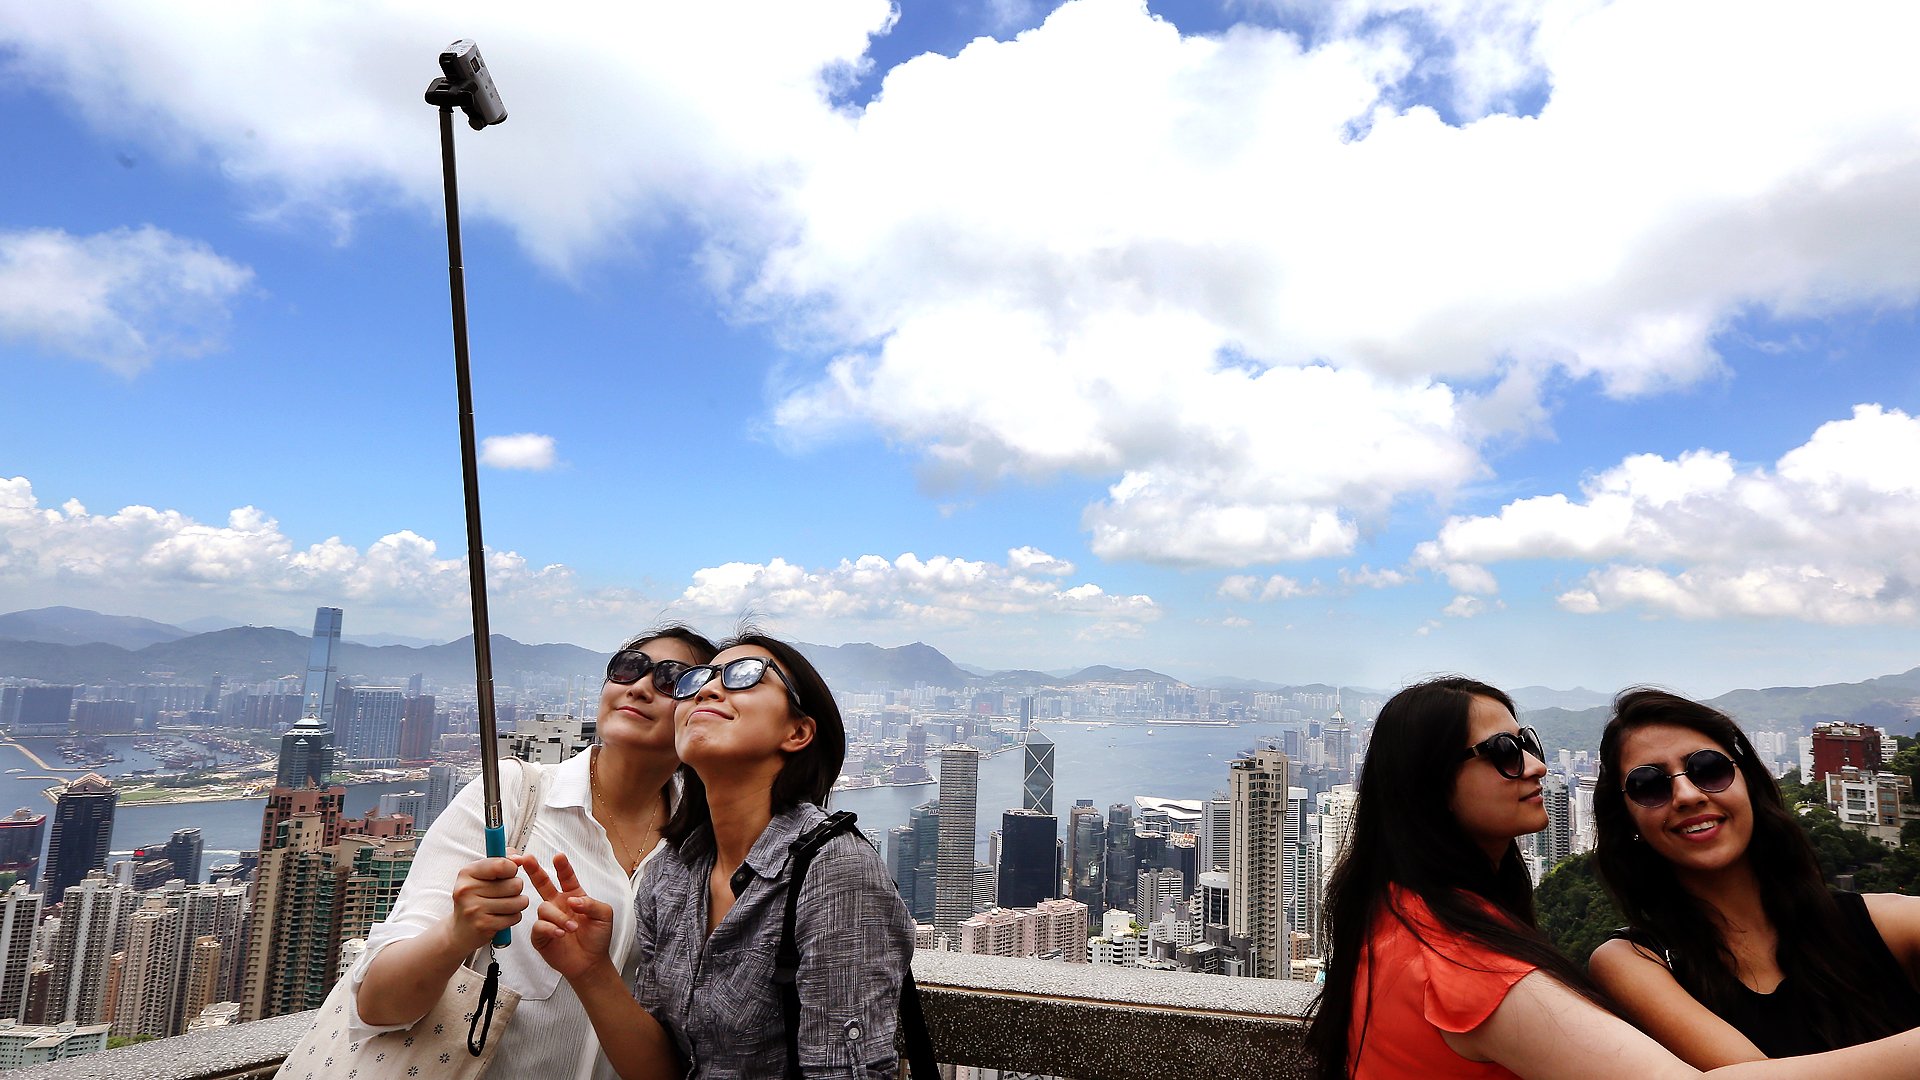 A fall in tourist numbers contributed to the downturn, respondents said. Photo: Nora Tam